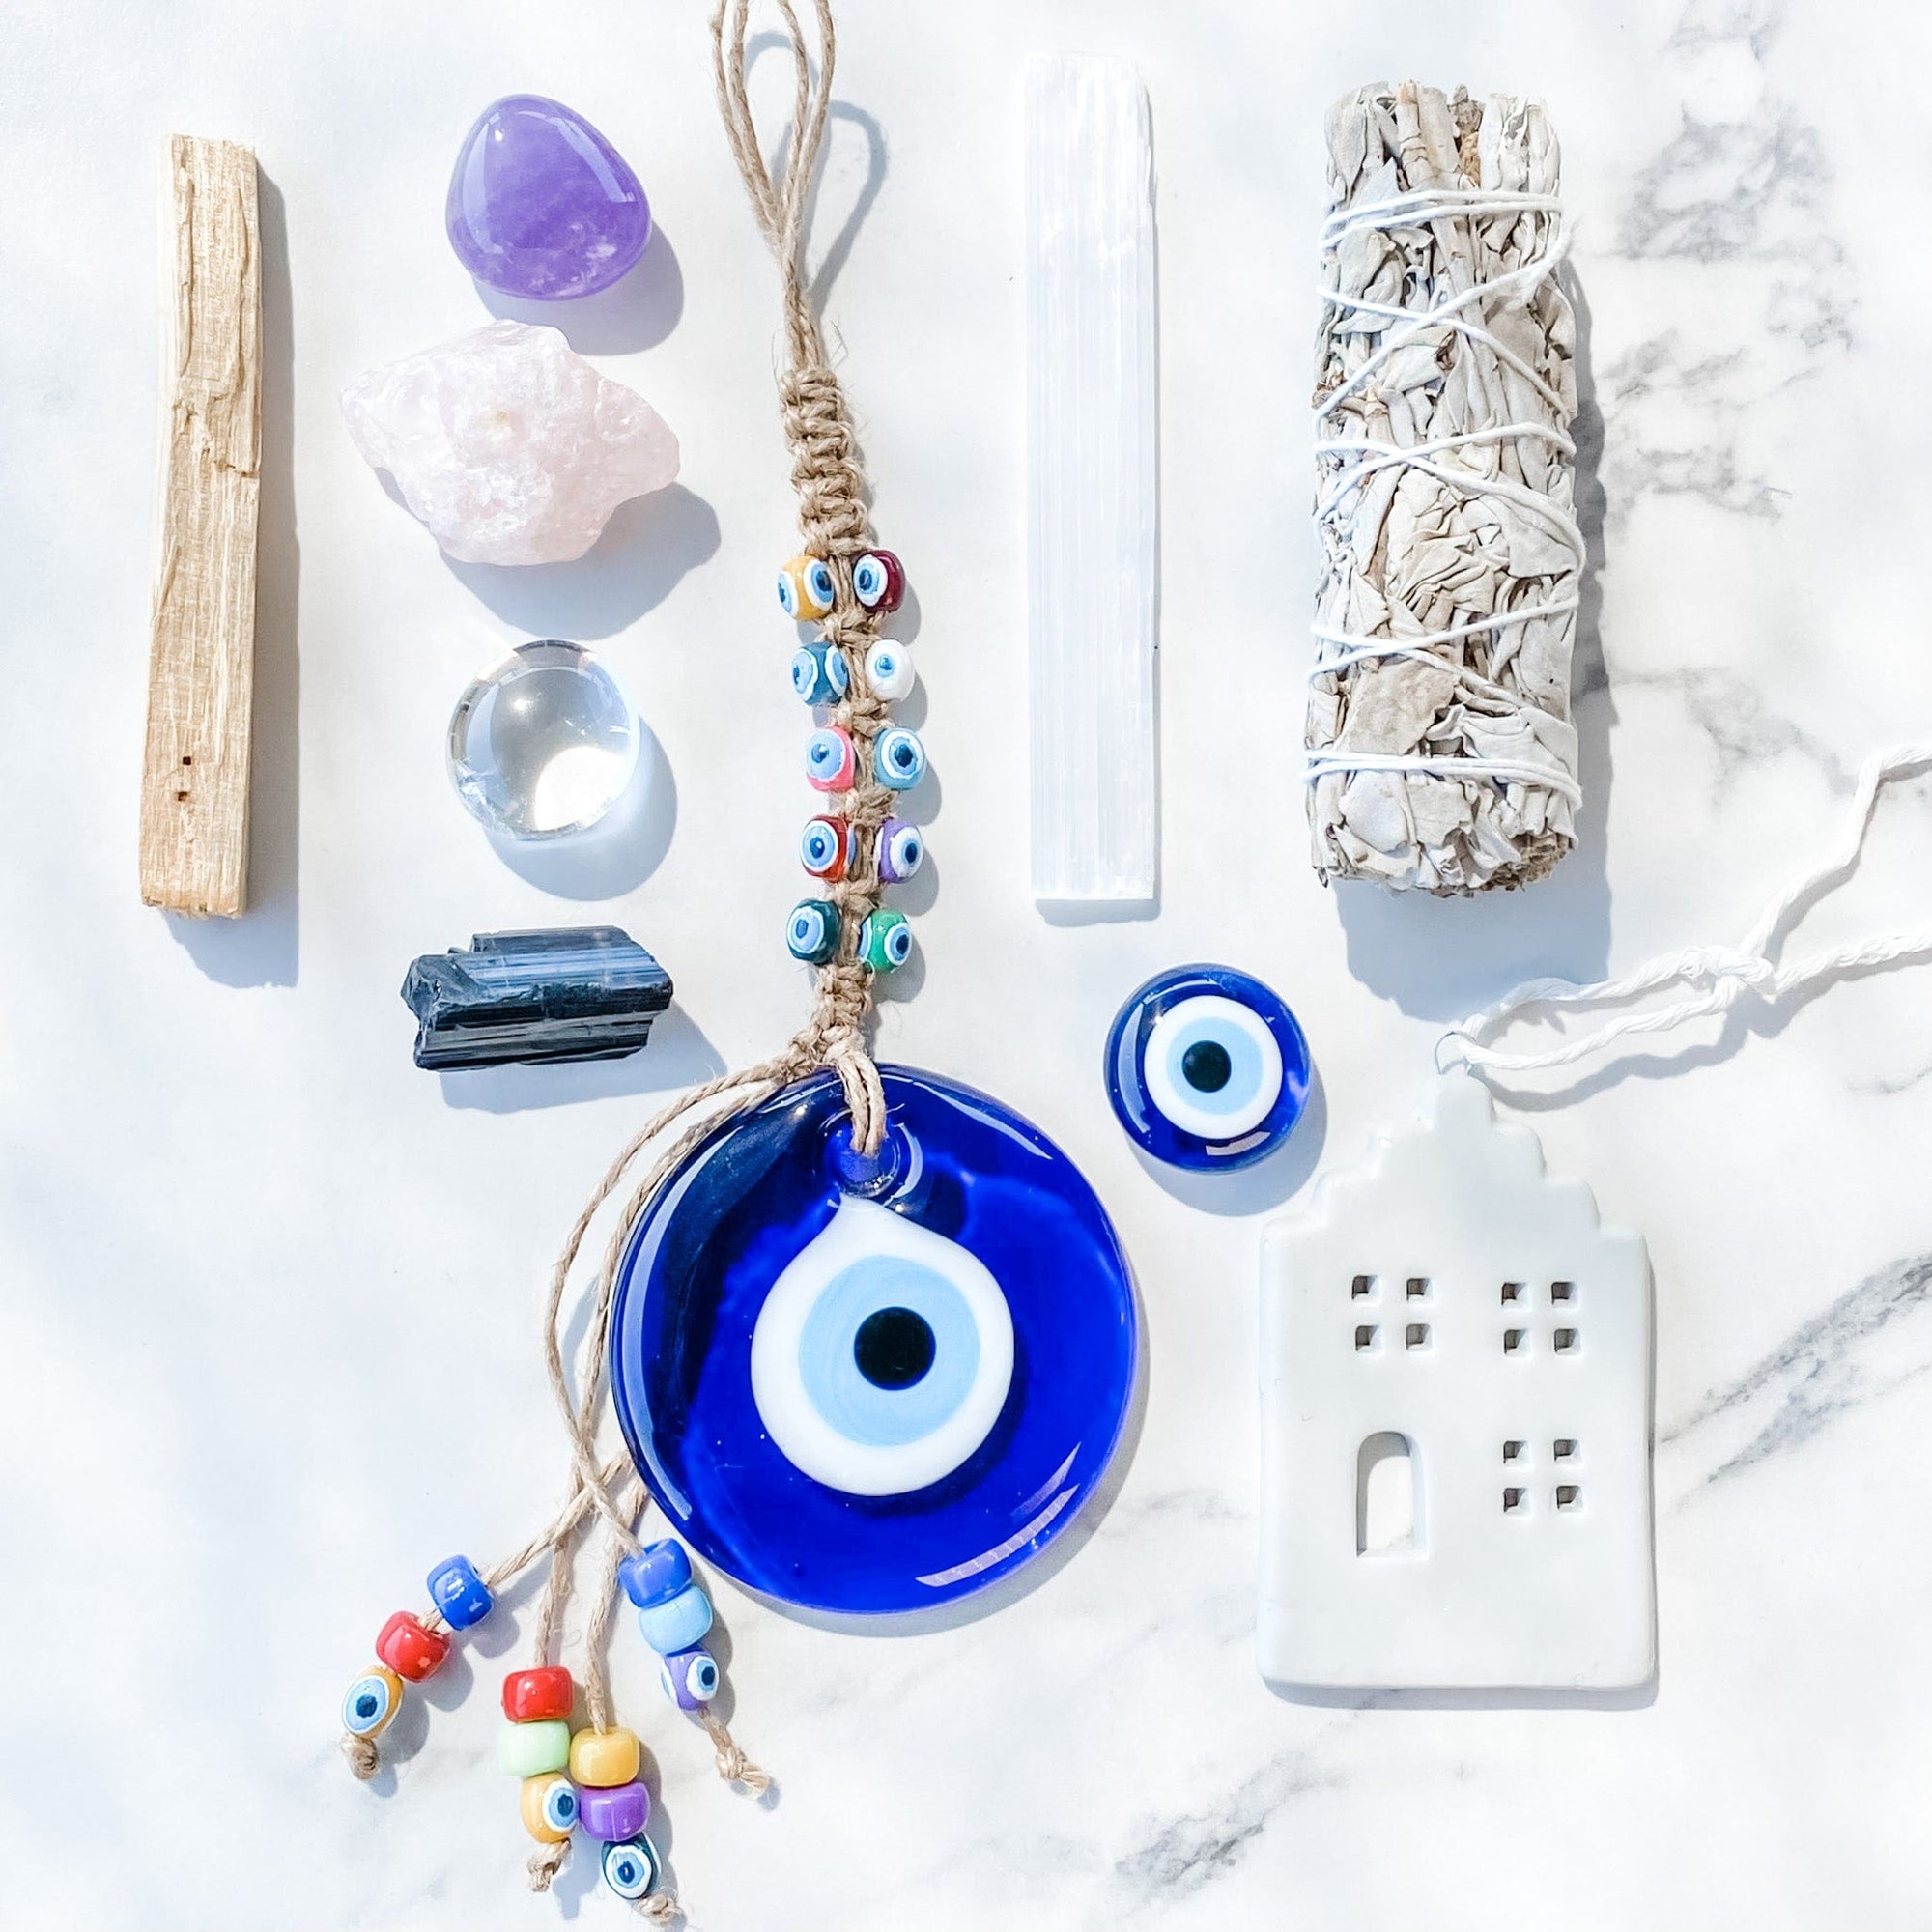 s1491 Evil Eye Home protection cleansing and harmony crystal kit australia. Home protection crystal kit australia.gemrox sydney 40